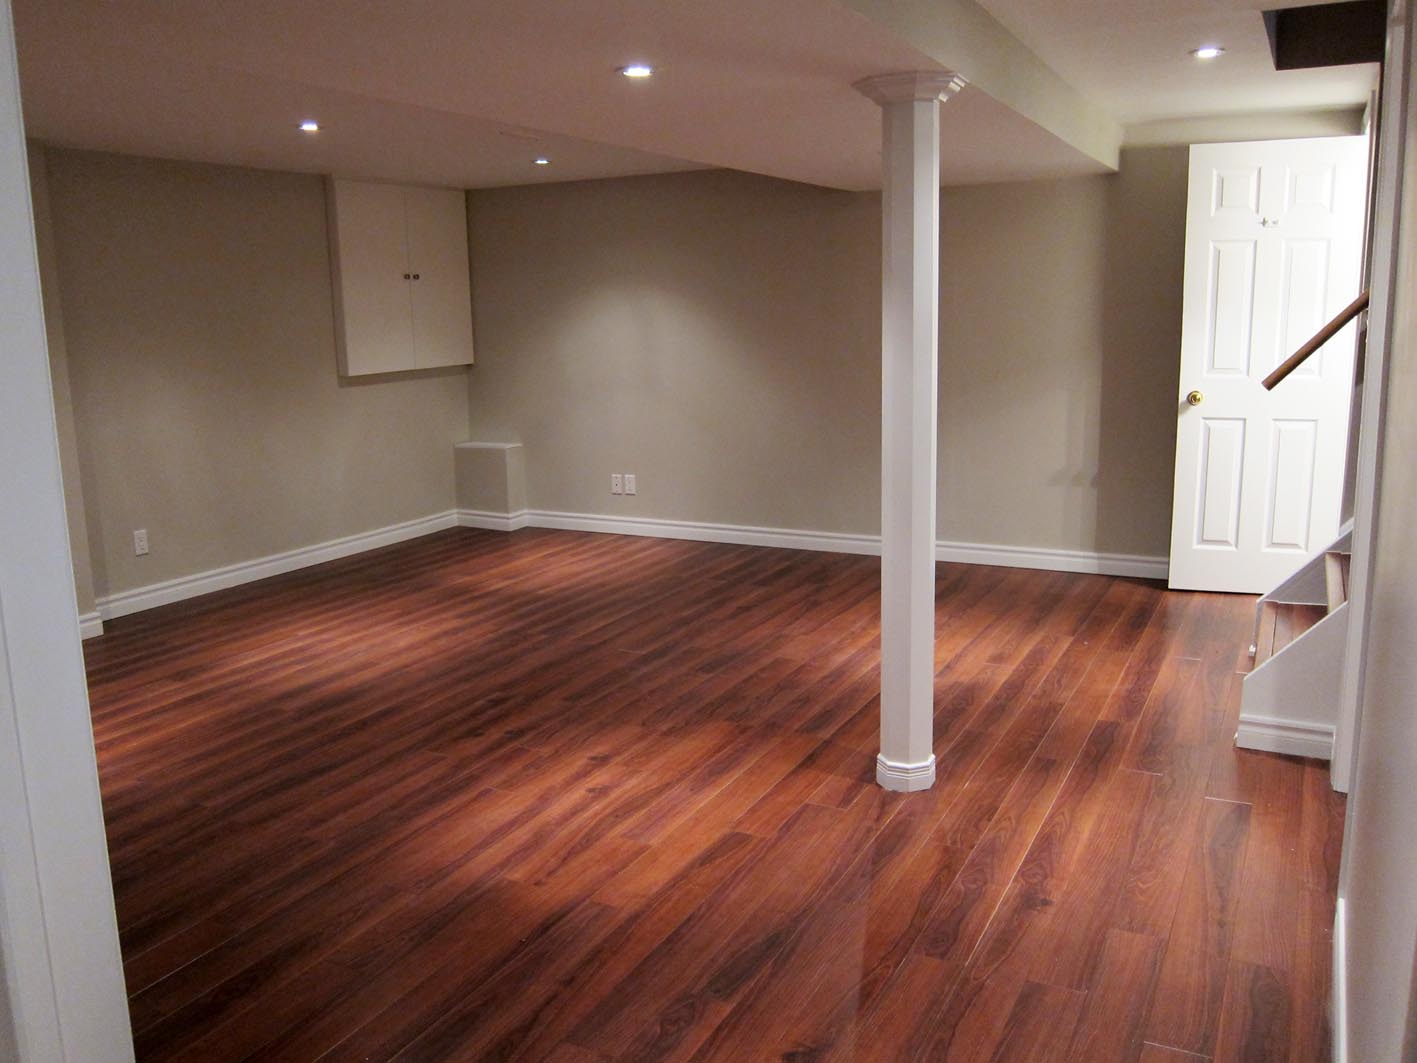 Before & Afters: Basement Renovation